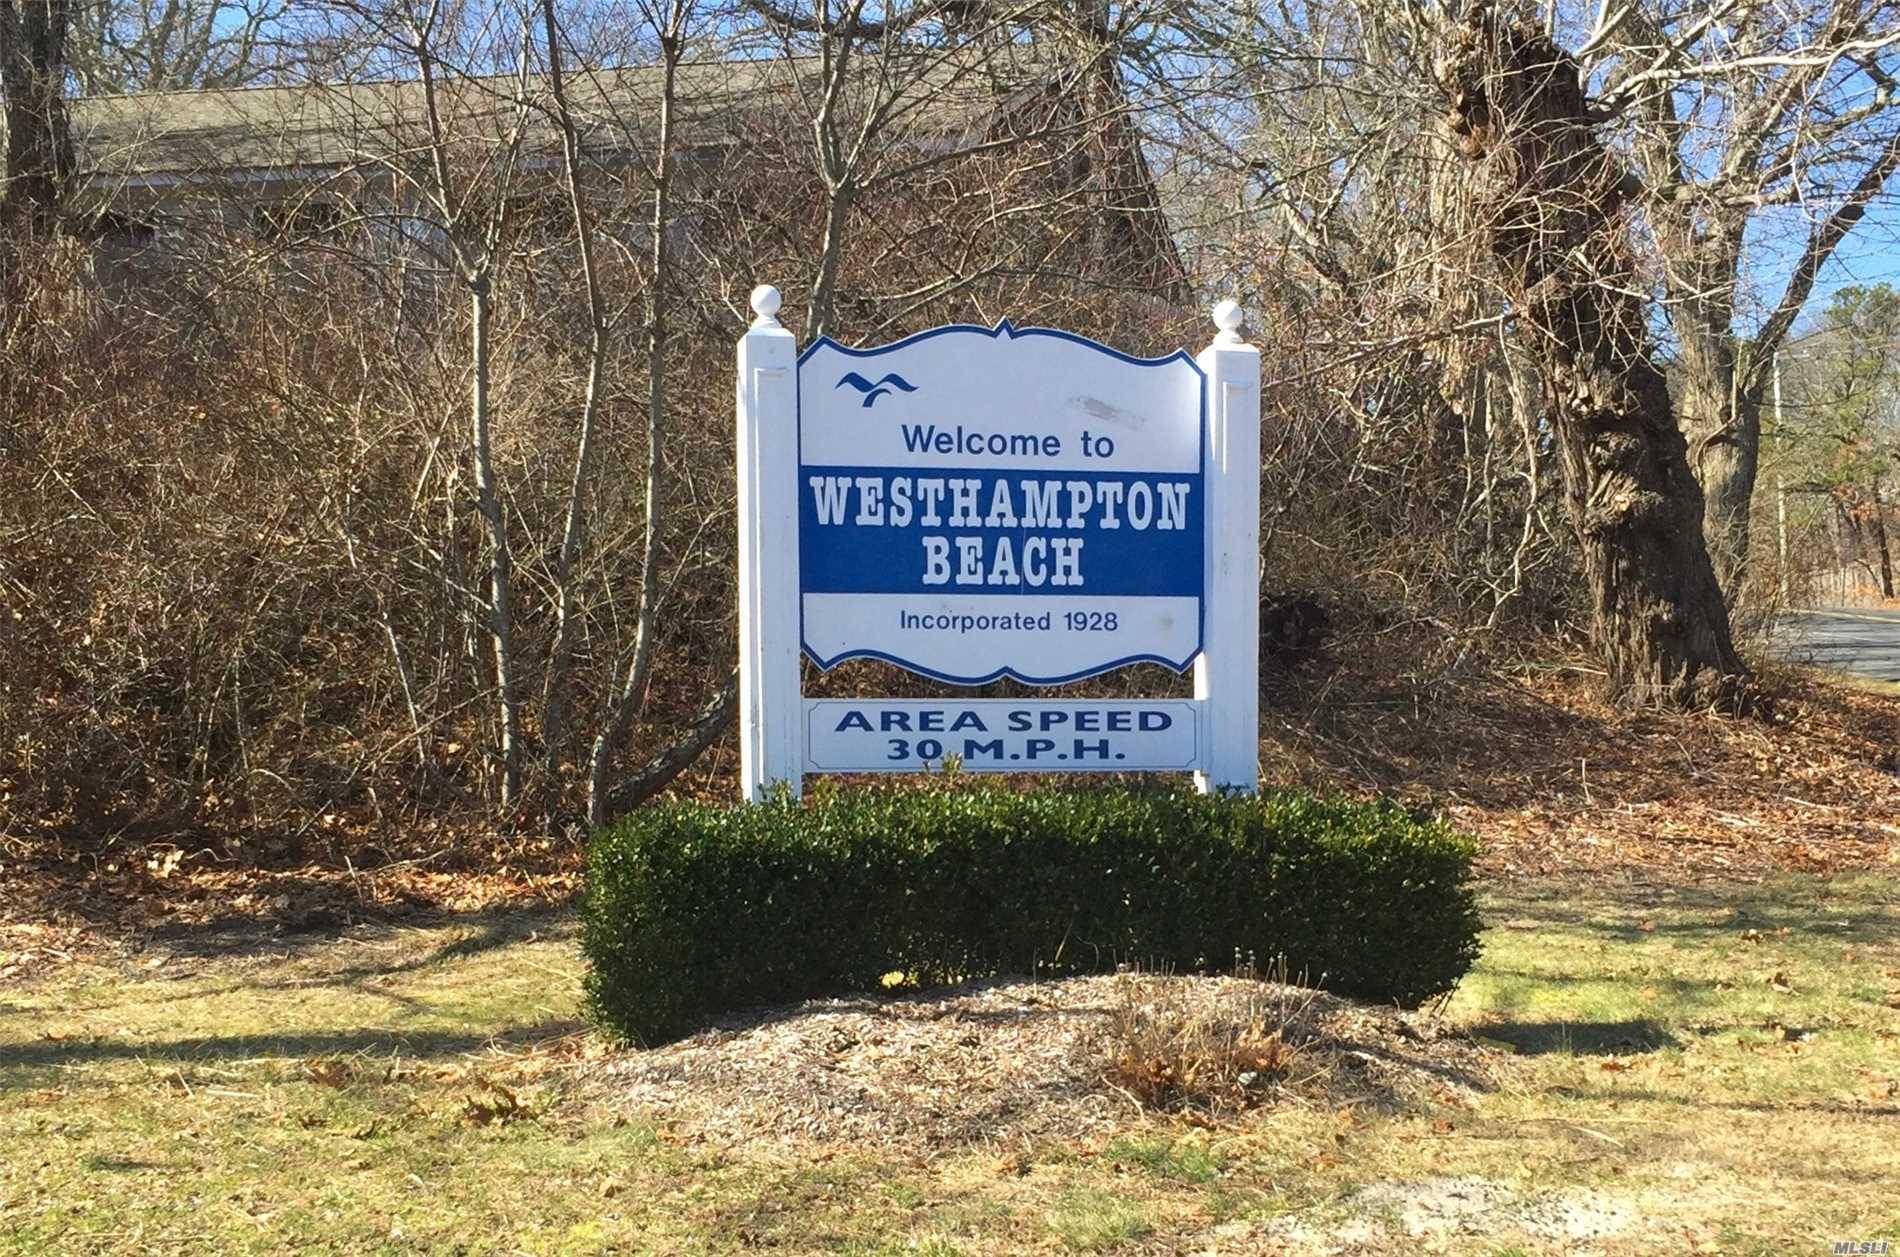 Calling Builders, End Users Or Investors To This Prime Location In Westhampton Beach!